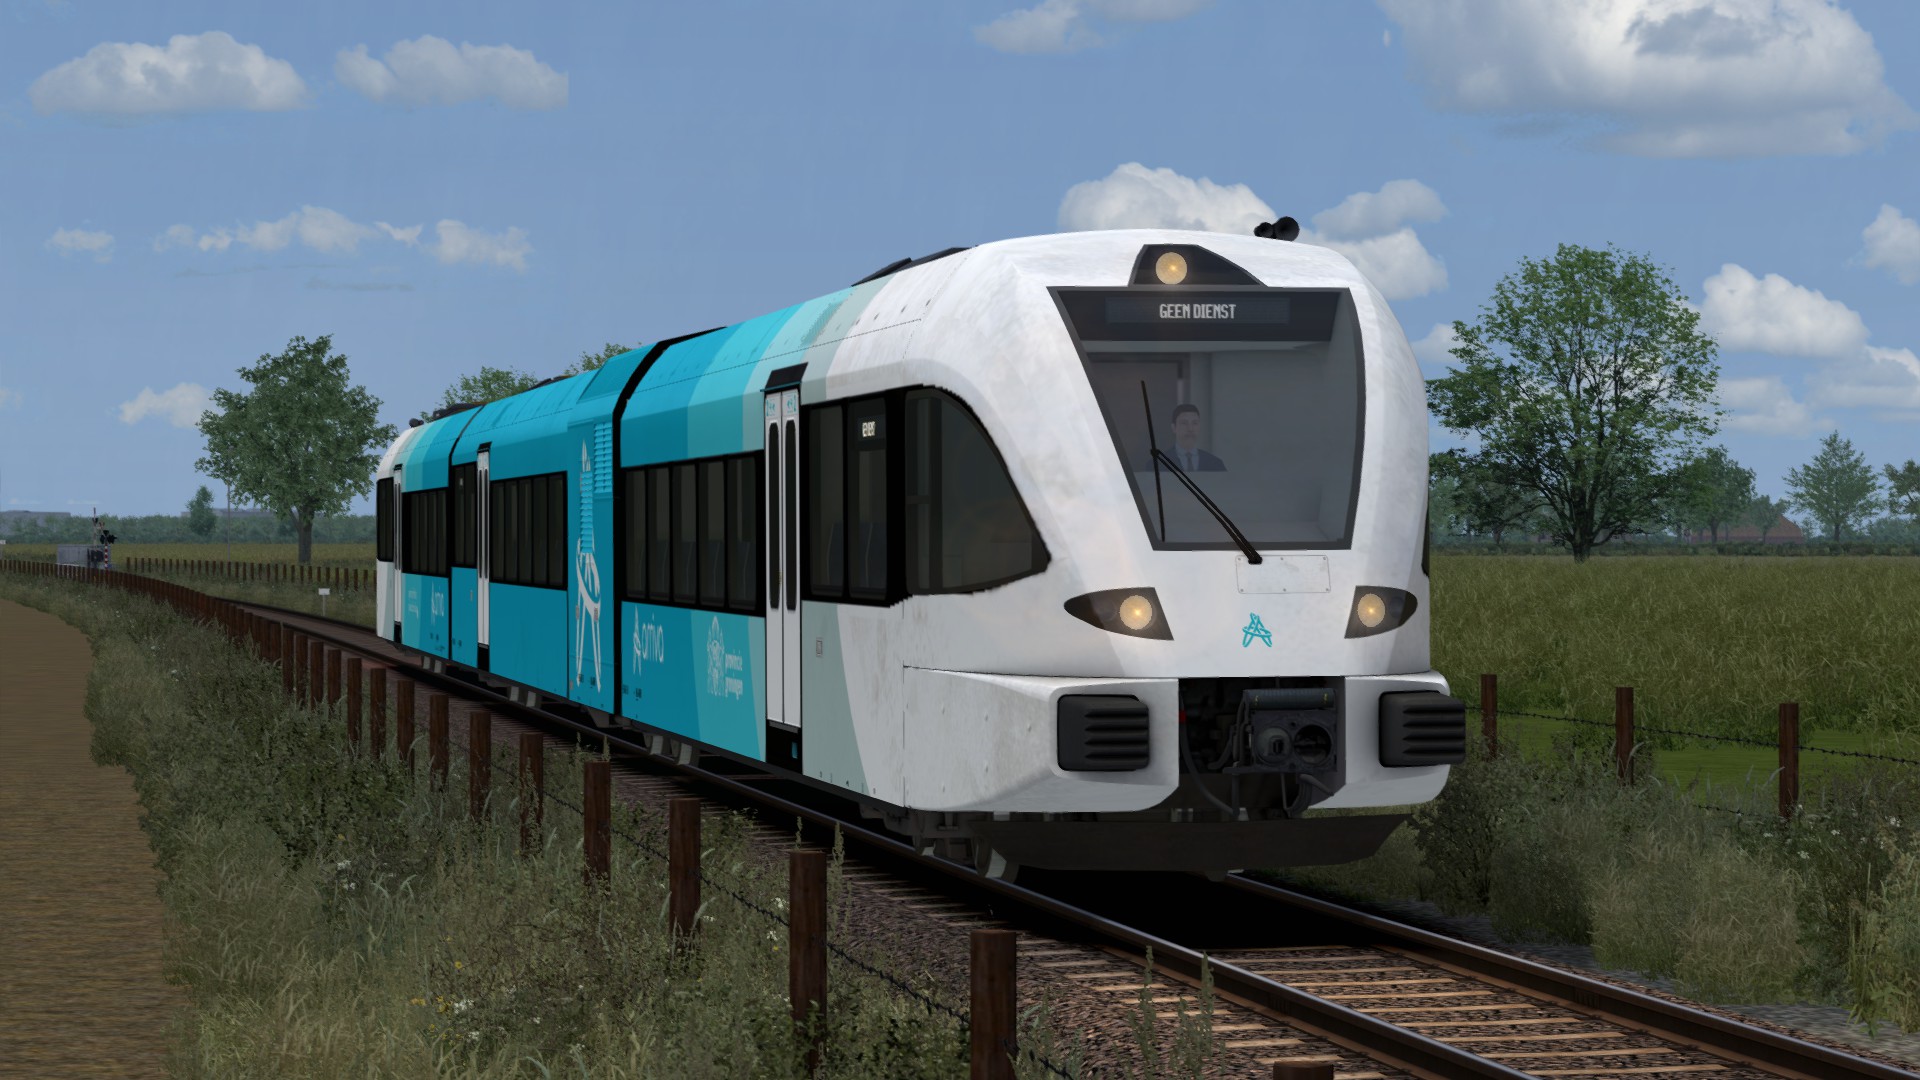 More information about "Stadler D-GTW and E-GTW Soundmod"